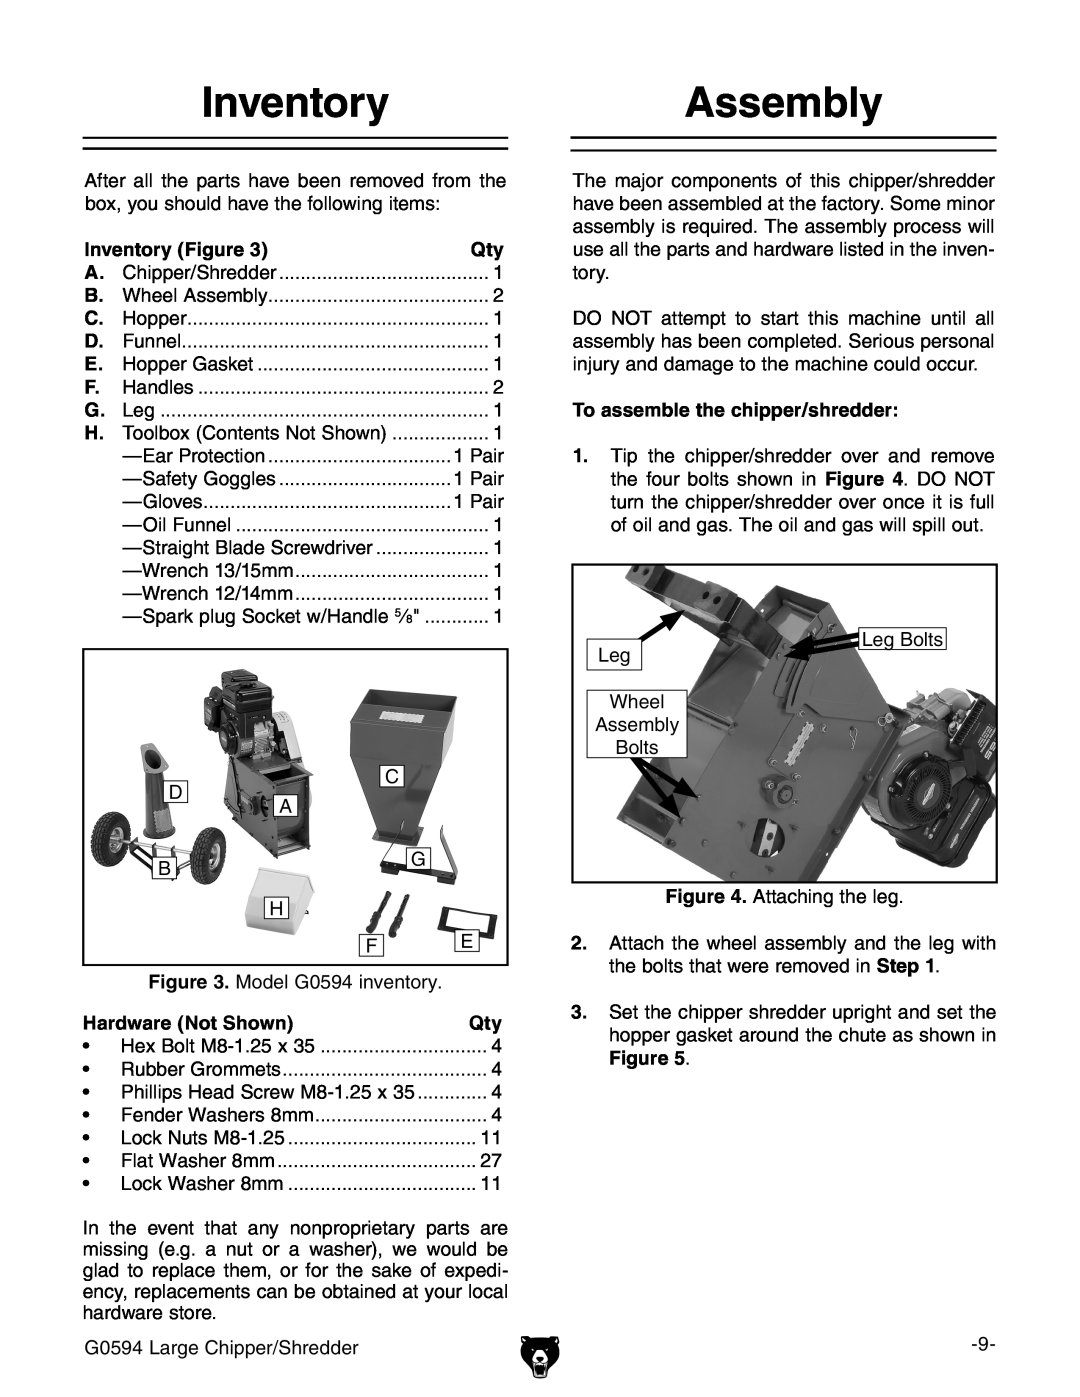 Grizzly G0594 owner manual InventoryAssembly, Inventory Figure, Hardware Not Shown, To assemble the chipper/shredder 